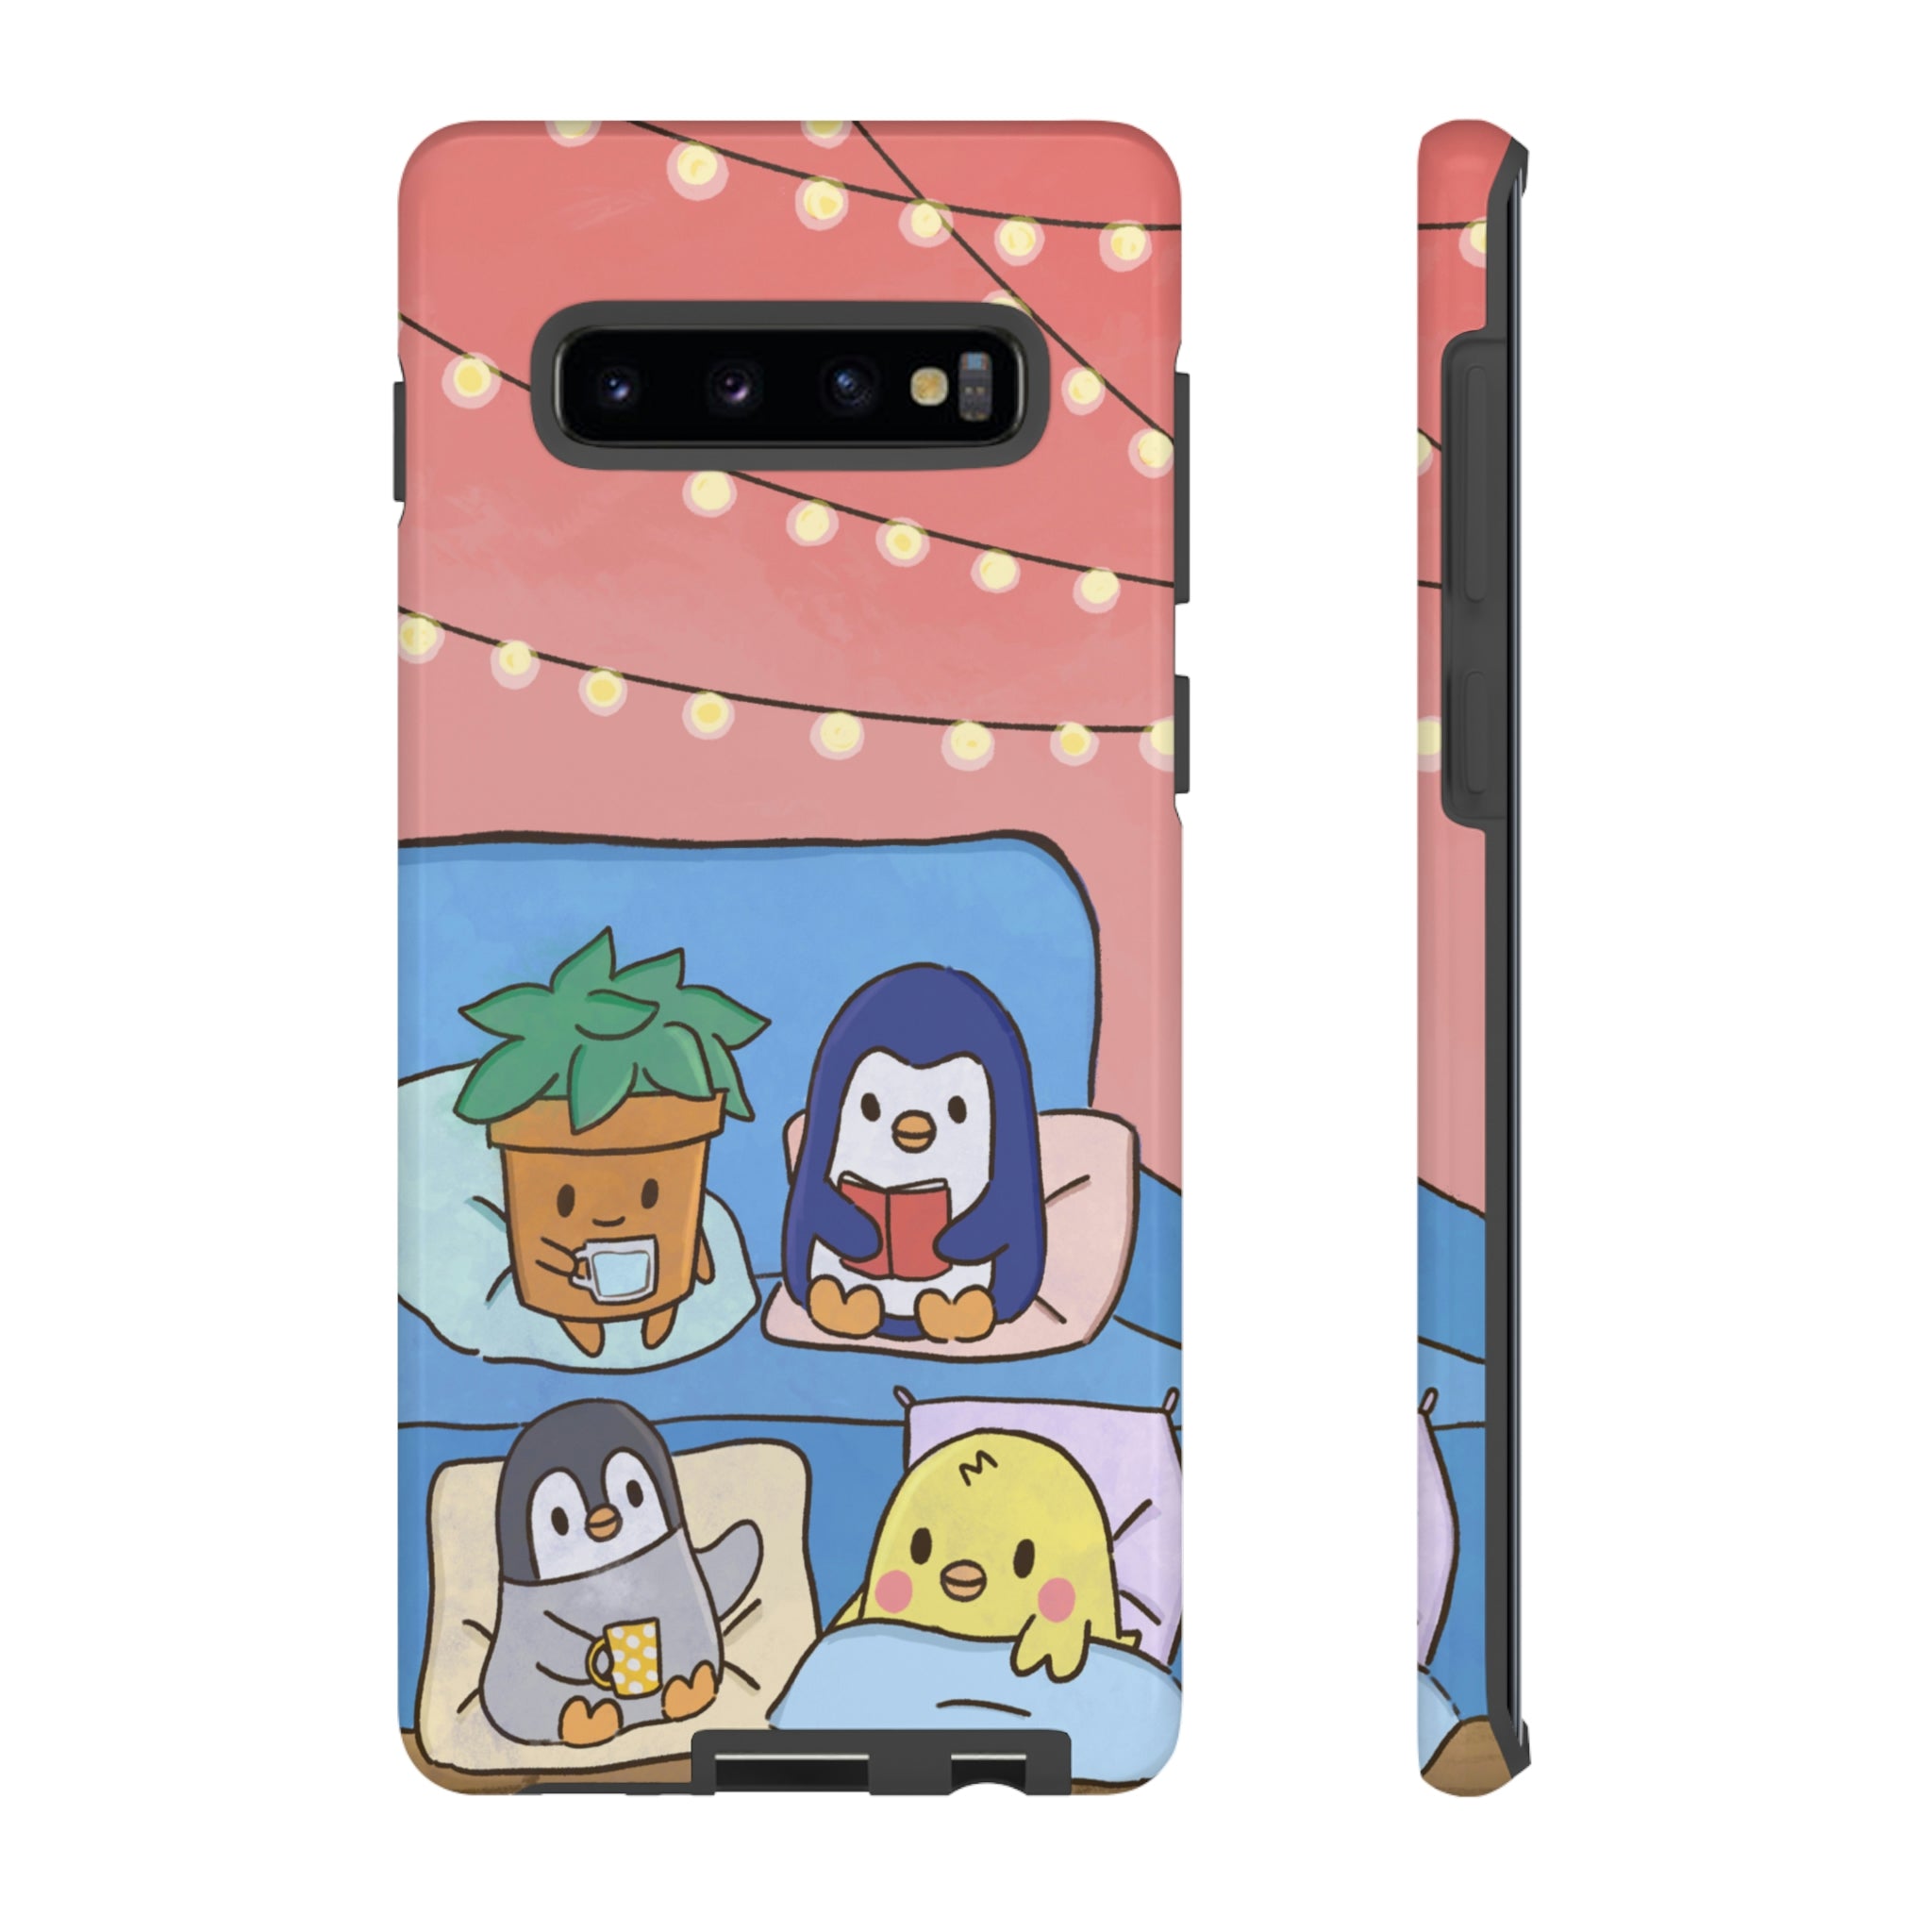 Comfy and Cozy Pink Samsung/Google Phone Case